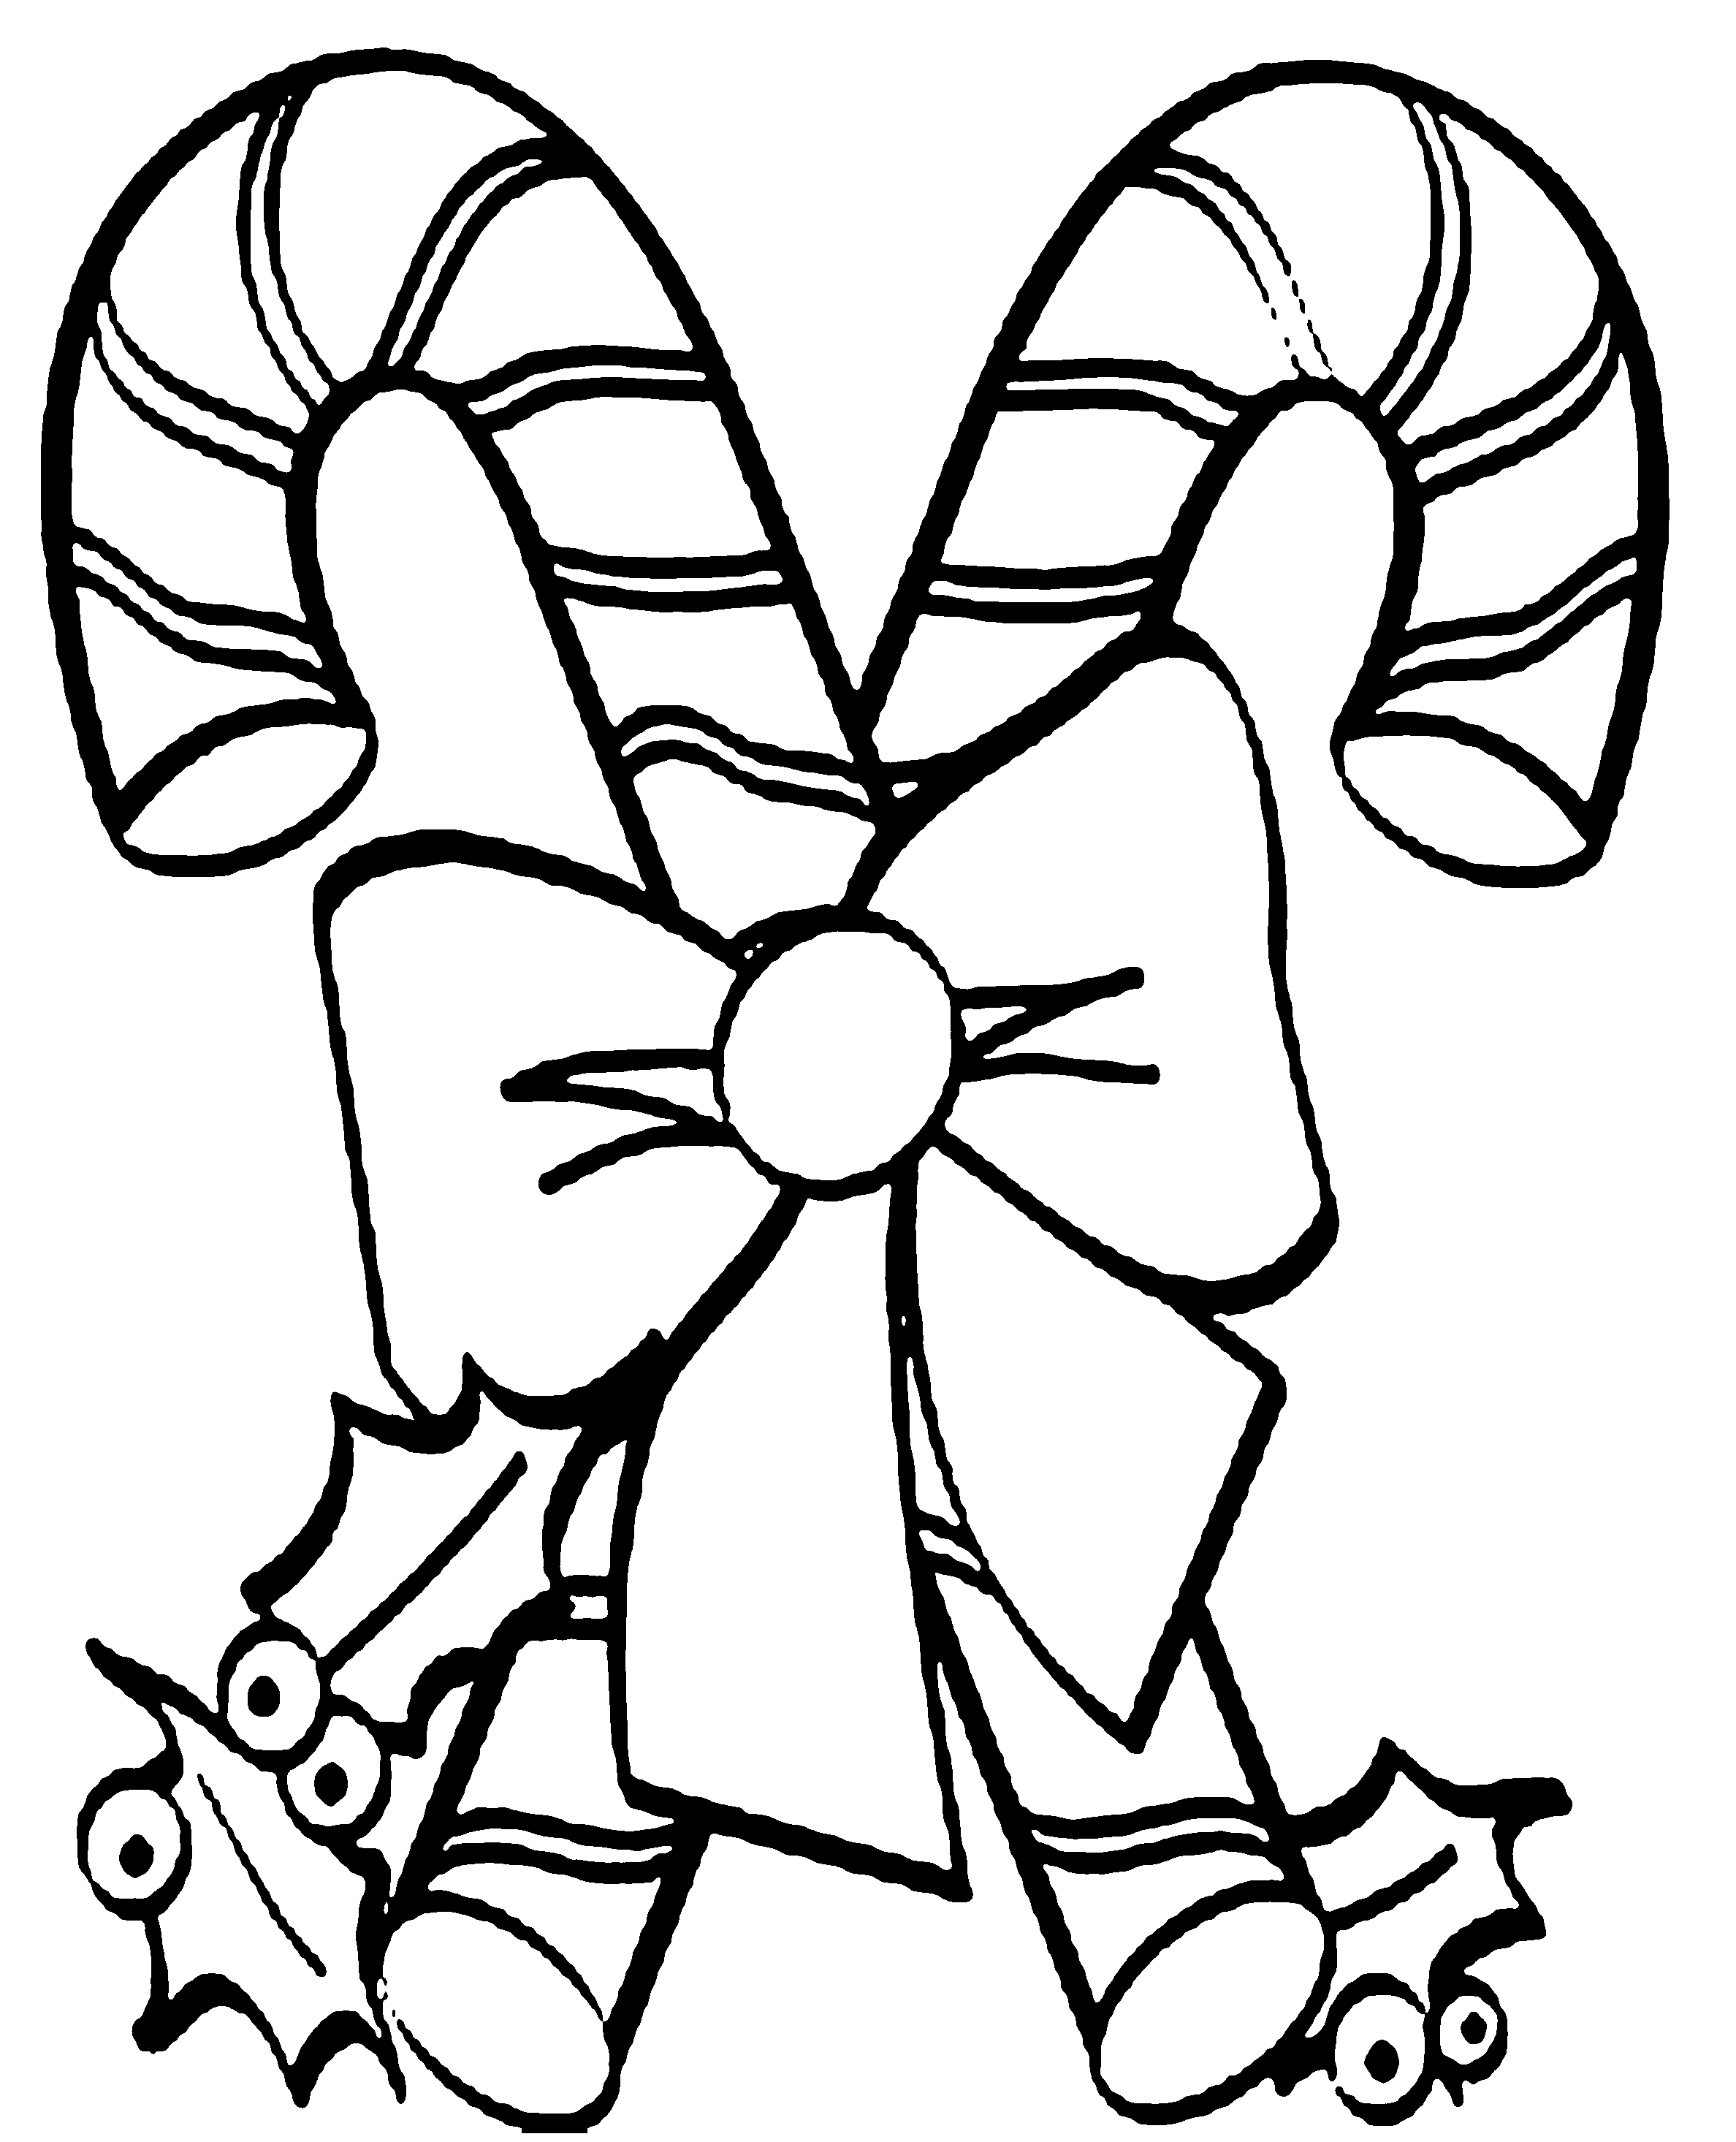 Candy Cane Character Coloring Page | Coloring Pages For All Ages